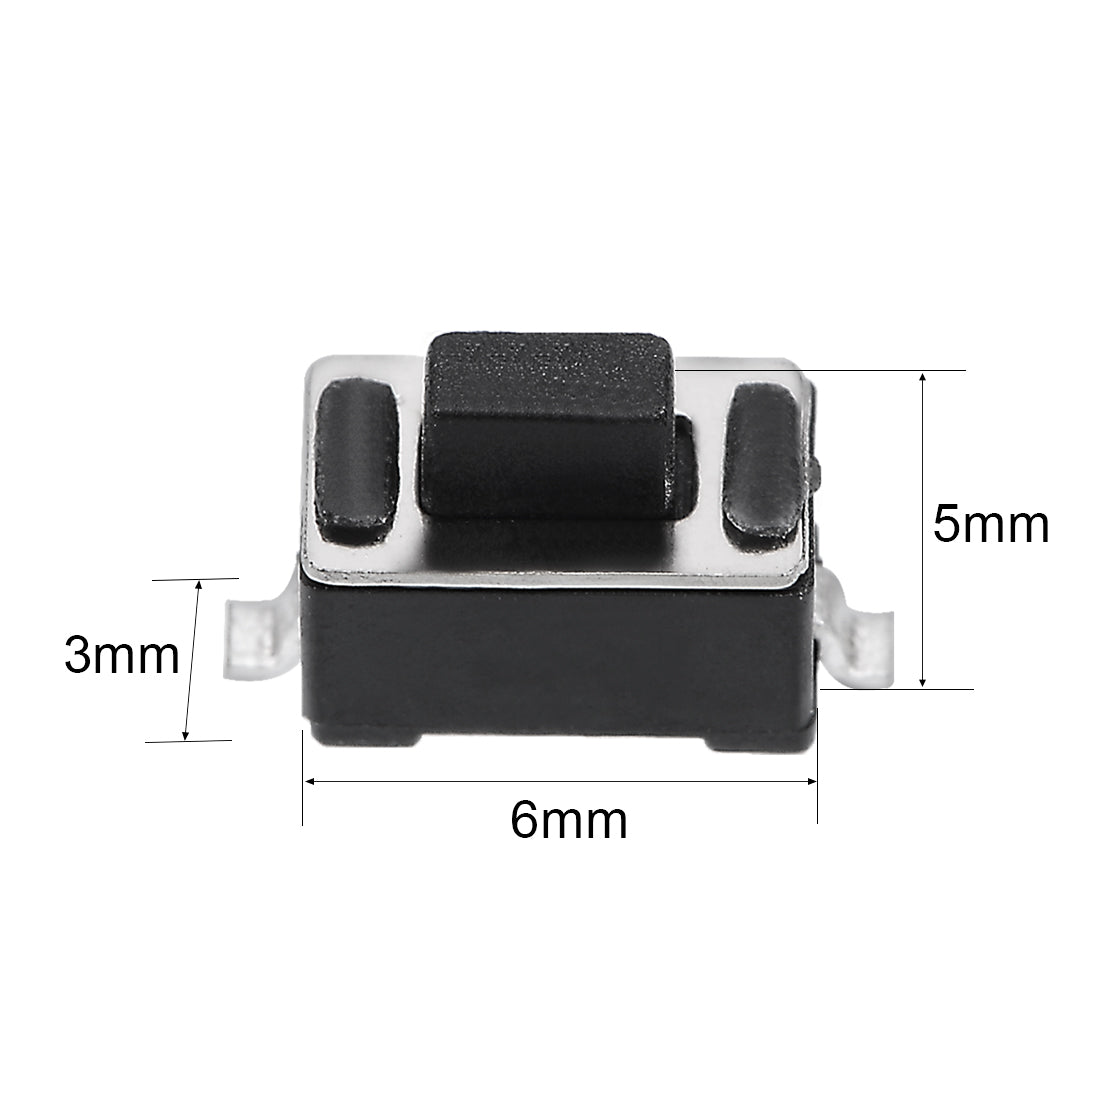 uxcell Uxcell 3x6x5mm Momentary Panel PCB Surface Mounted Devices SMT Mount 2 Pins Push Button SPST Tactile Tact Switch 10PCS